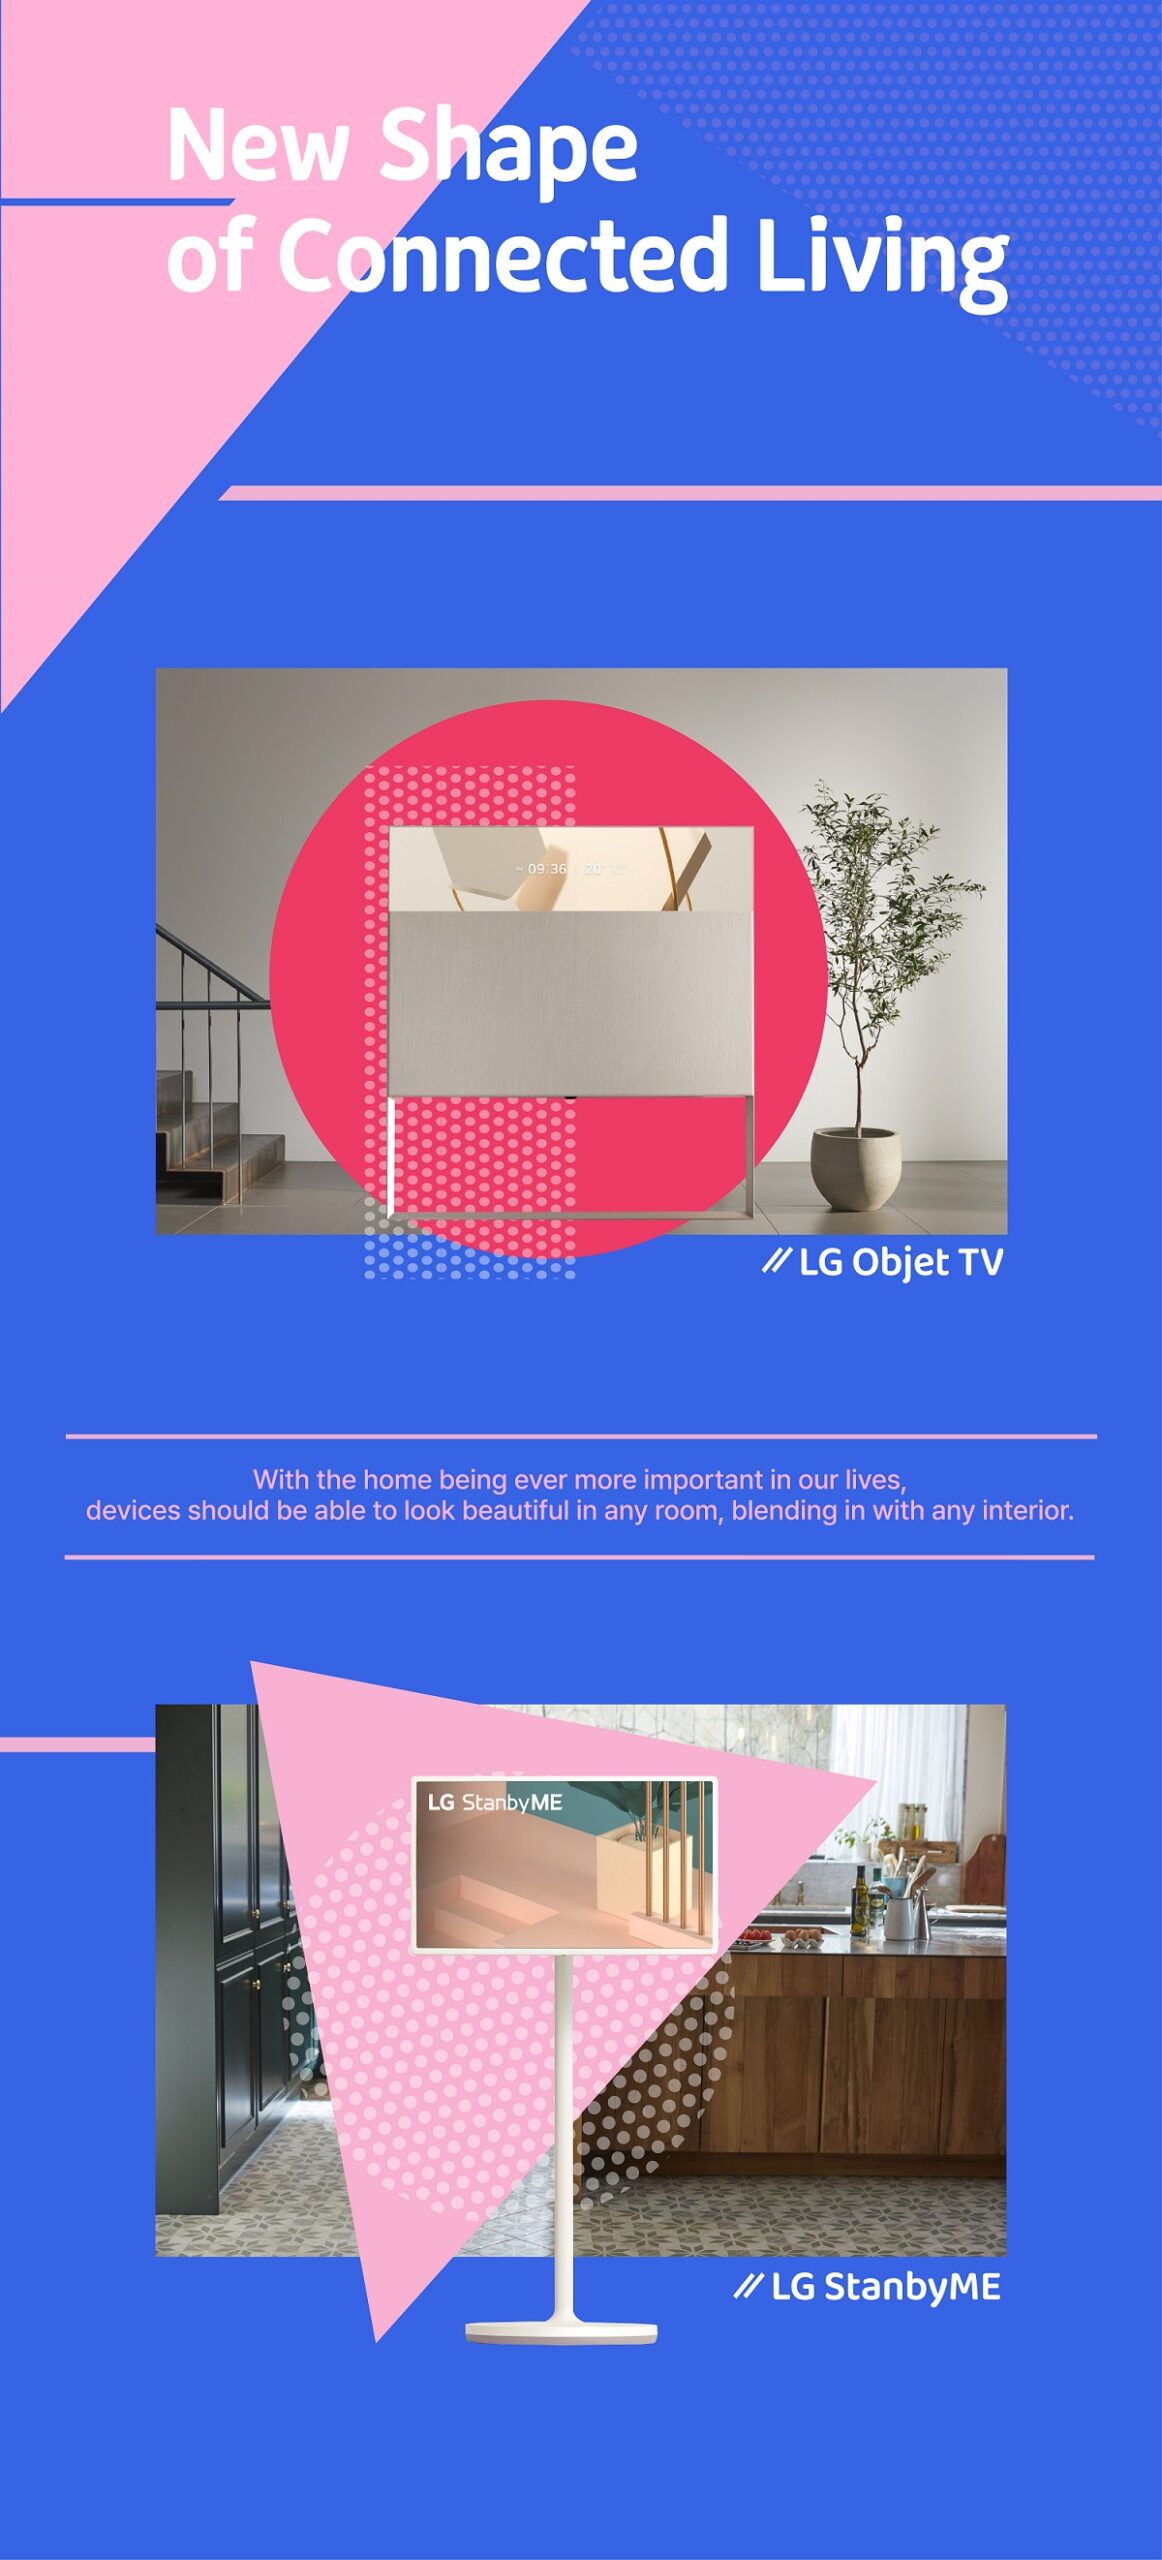 An overall look of the story related to connected living with photos of LG Objet TV and LG StanbyME